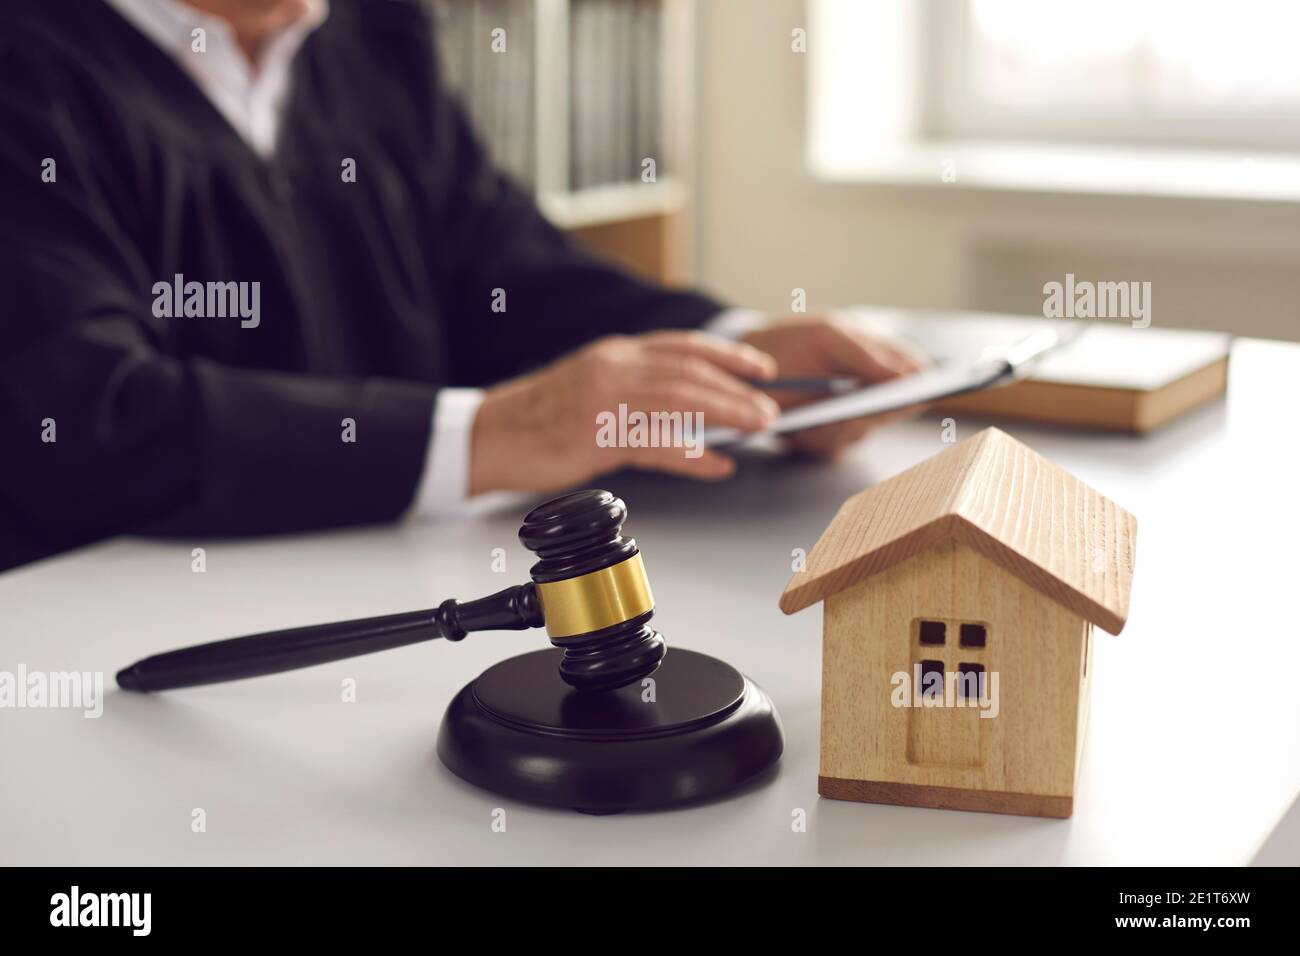 Gavel on sound block and toy house on judge's table in courtroom during court hearing Stock Photo